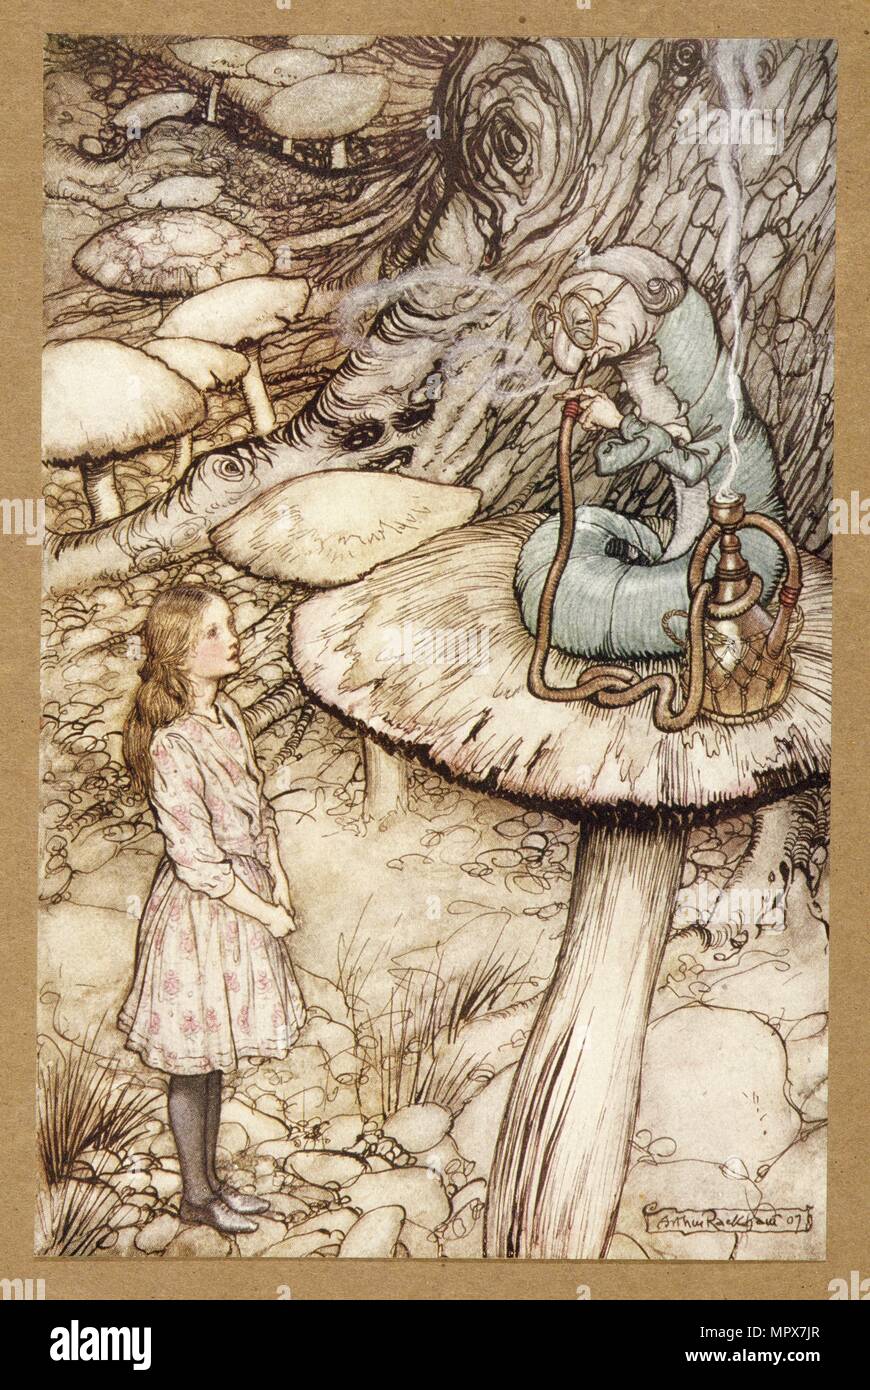 Advice from a Caterpillar,  from Alice's Adventures in Wonderland, by Lewis Carroll, pub. 1907. Stock Photo